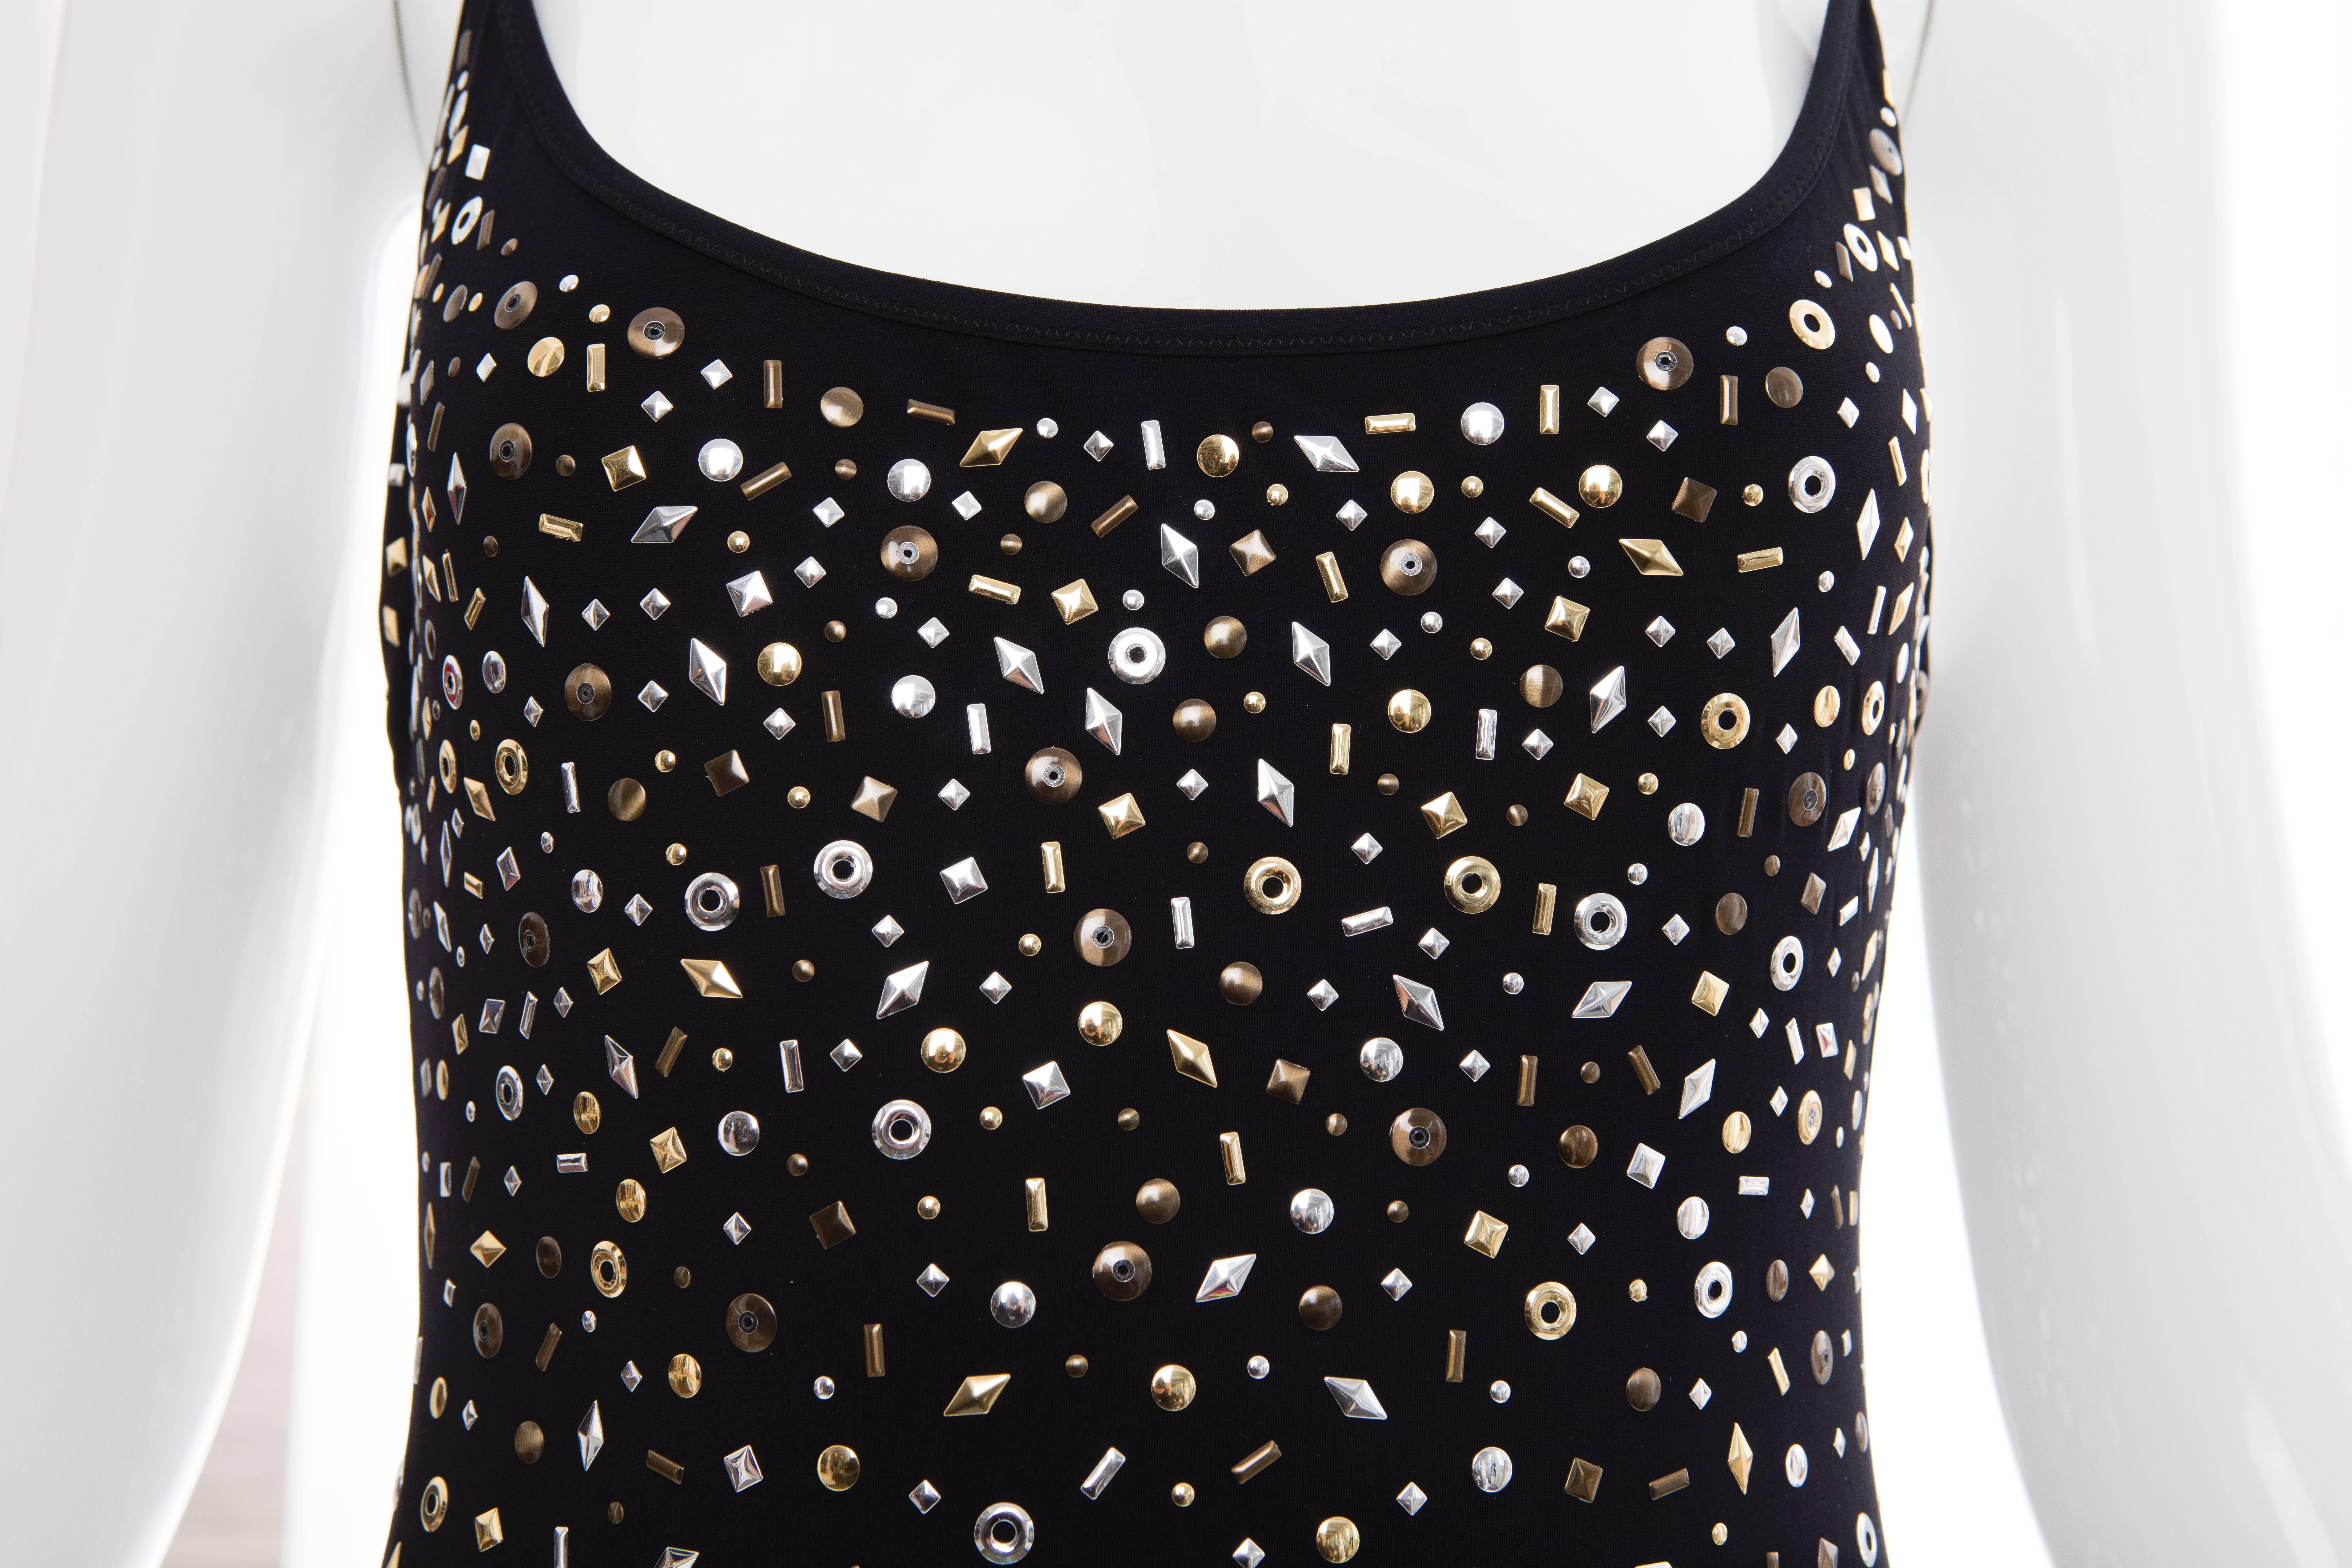 Moschino Black Nylon Spandex Bodysuit With Gold And Silver Embellishments For Sale 1